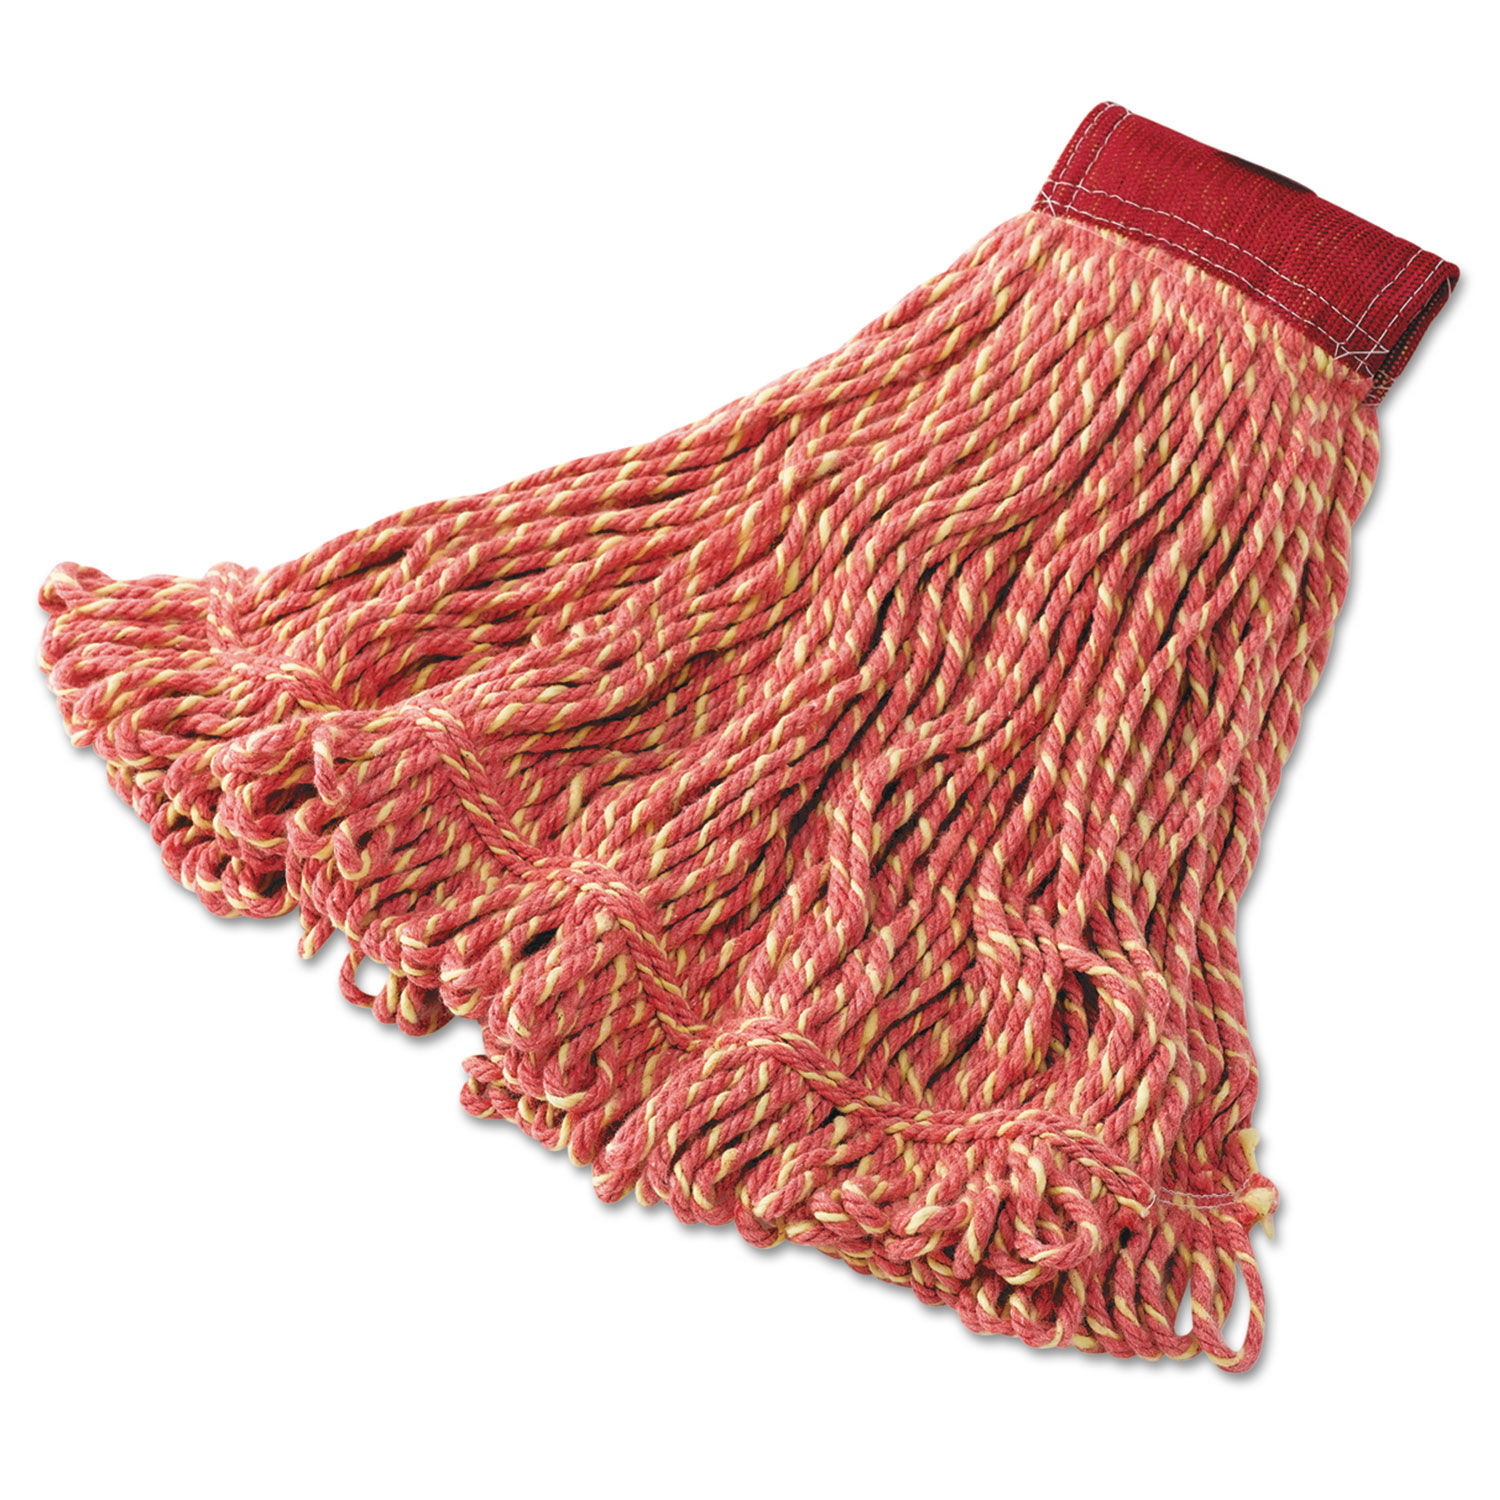 Super Stitch Blend Mop Heads Cotton/Synthetic, Red, Large